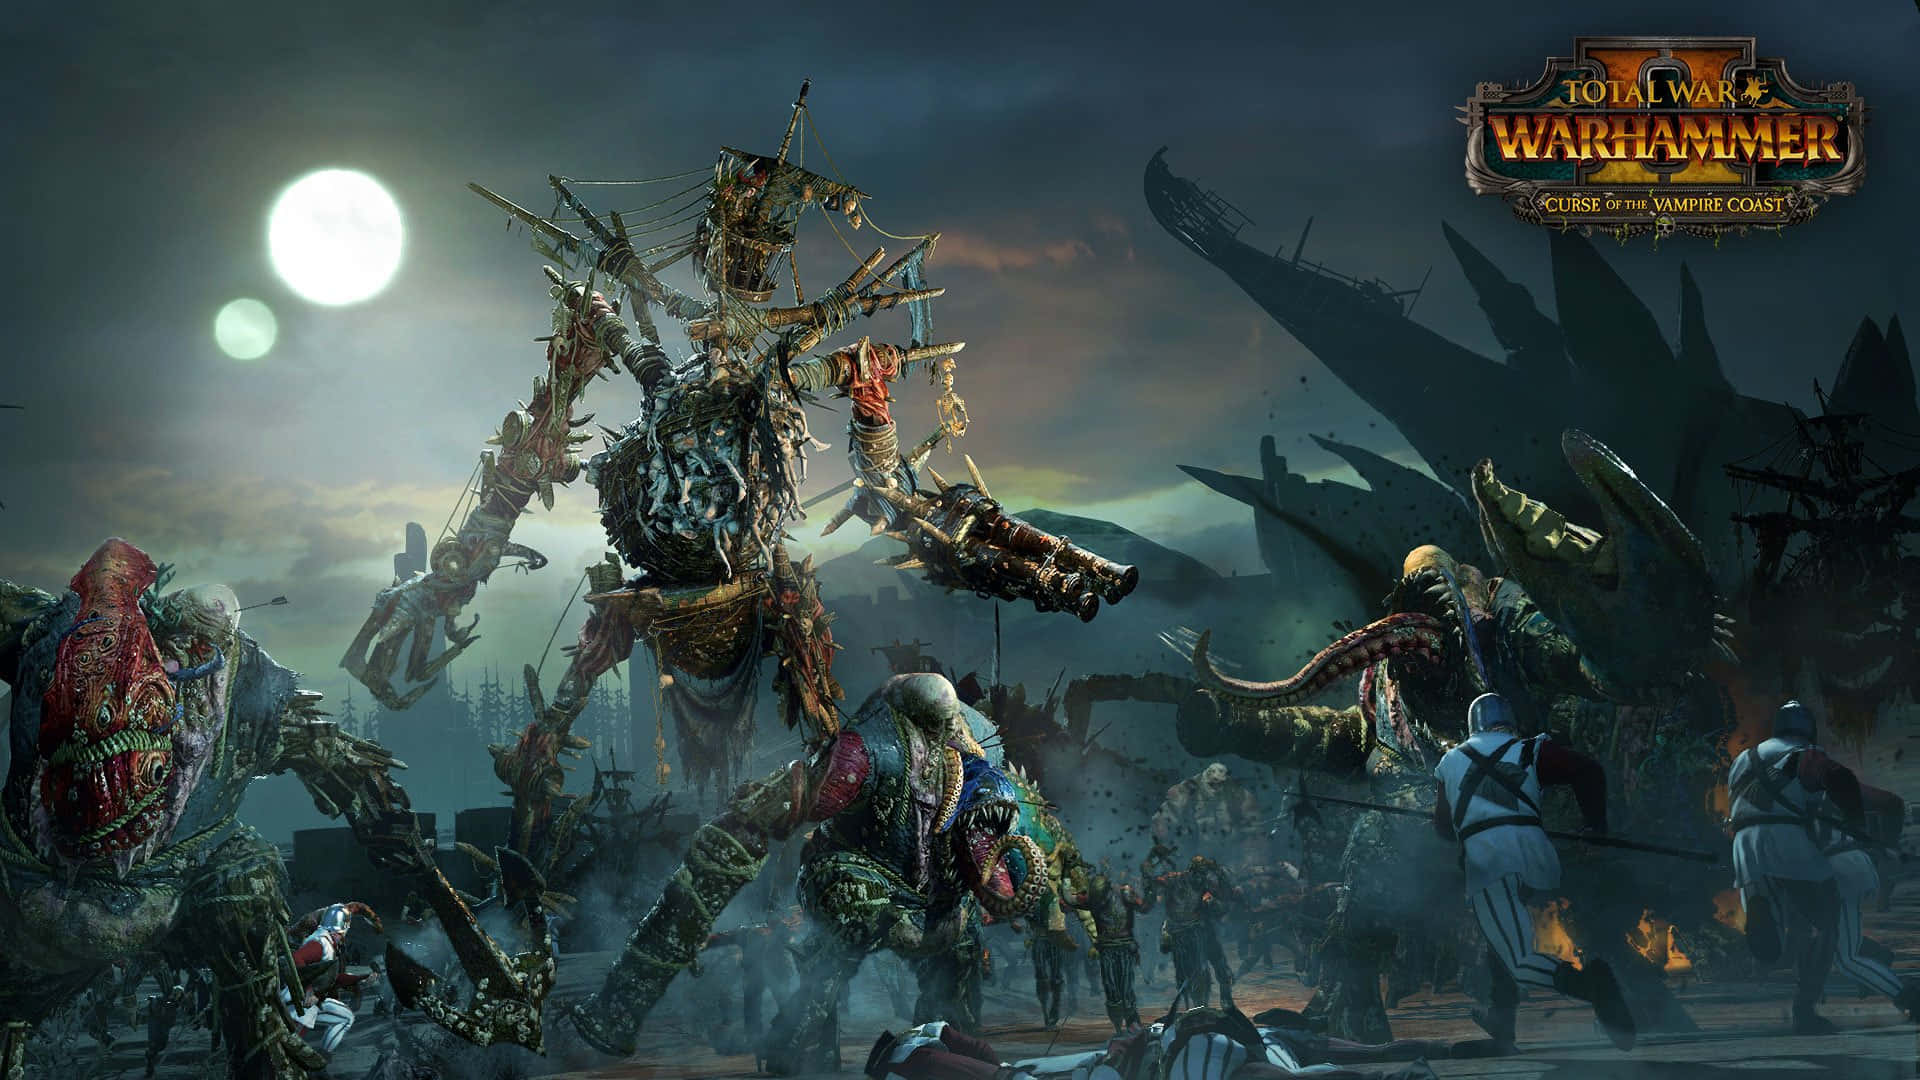 Join The Epic Battles of Total War Warhammer II